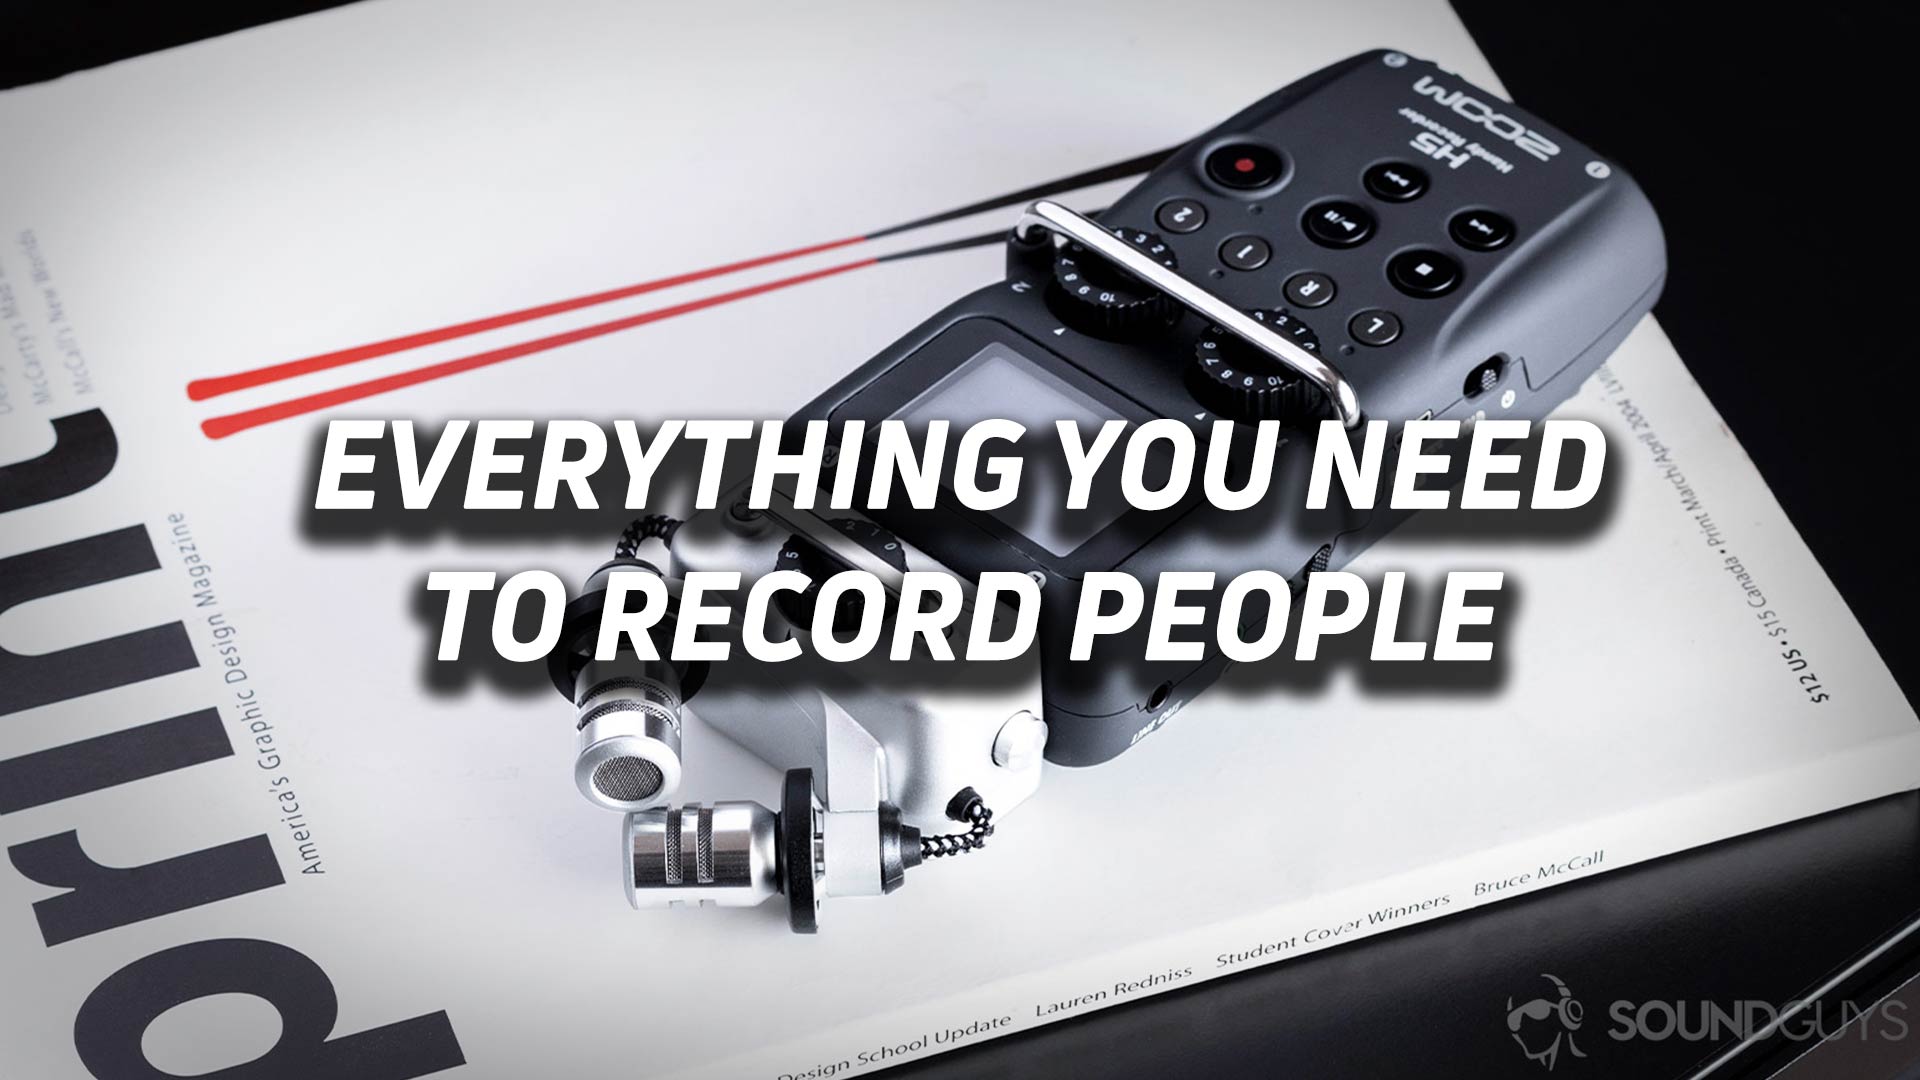 A Zoom handheld recorder on top of a white magazine cover with the text "Everything you need to record people" overlaid.